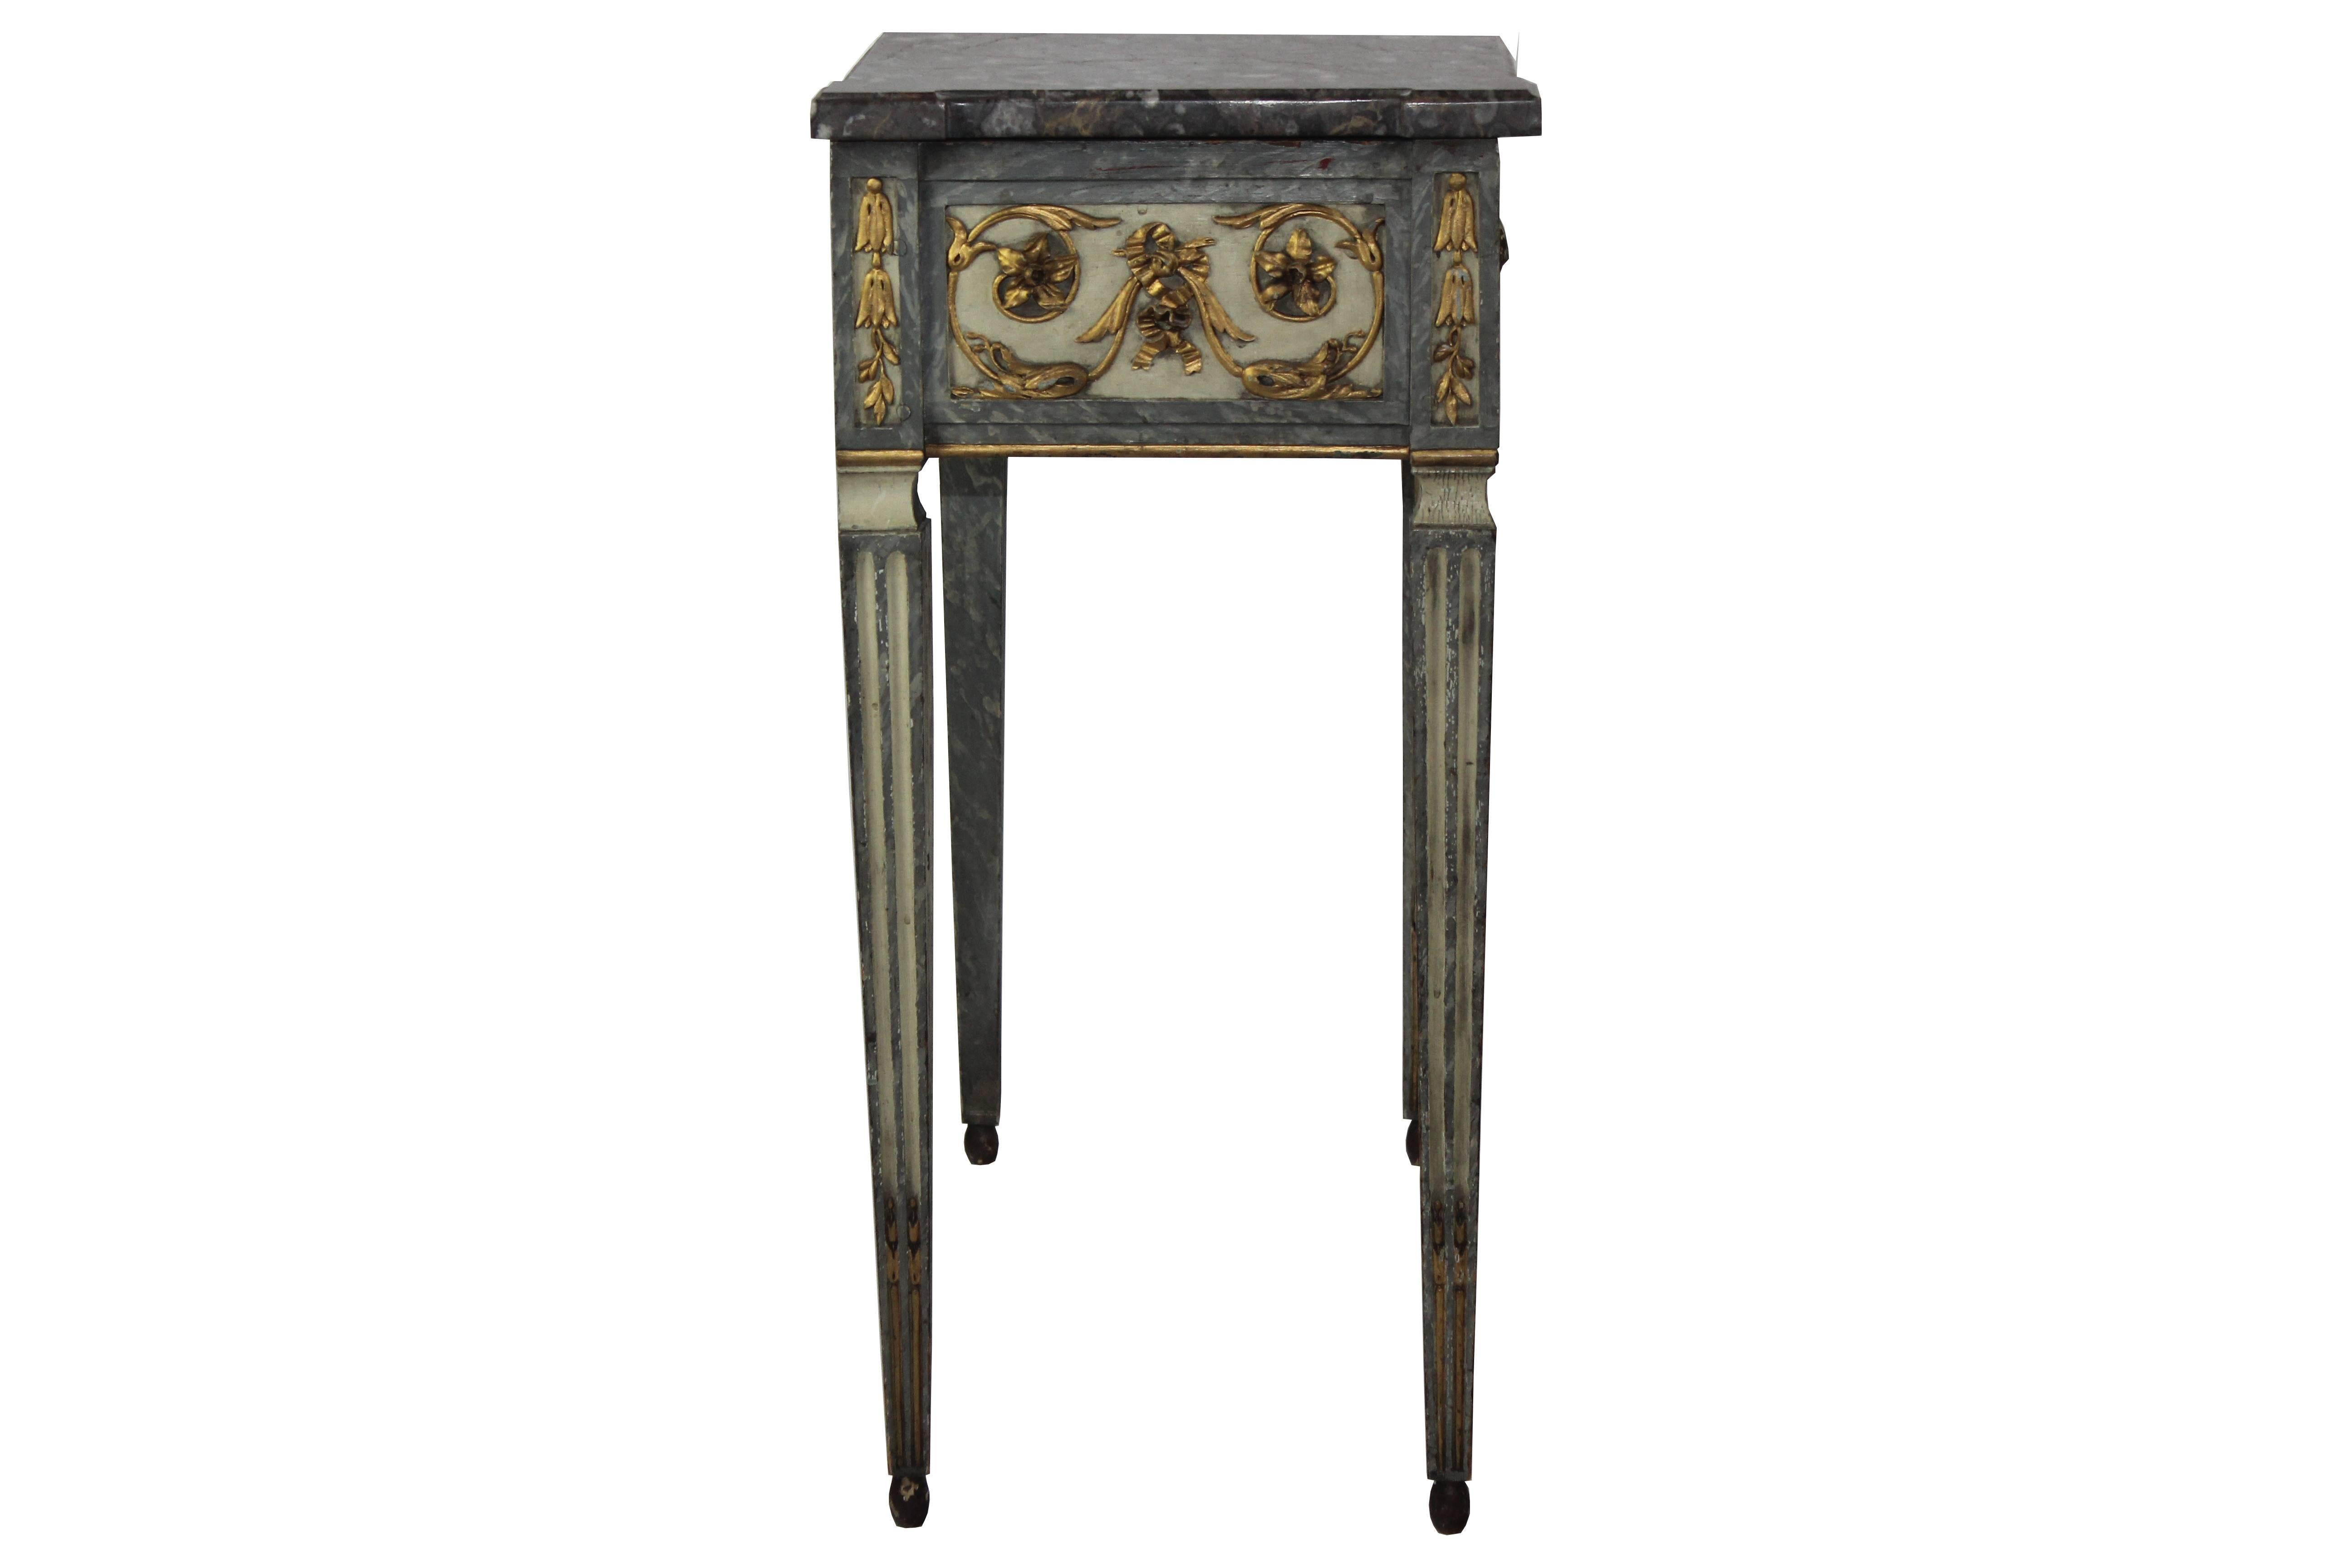 19th century marble-top table painted in faux marble. The drawer handle is wood carved in tigers head ornate carving on the front and on each side.